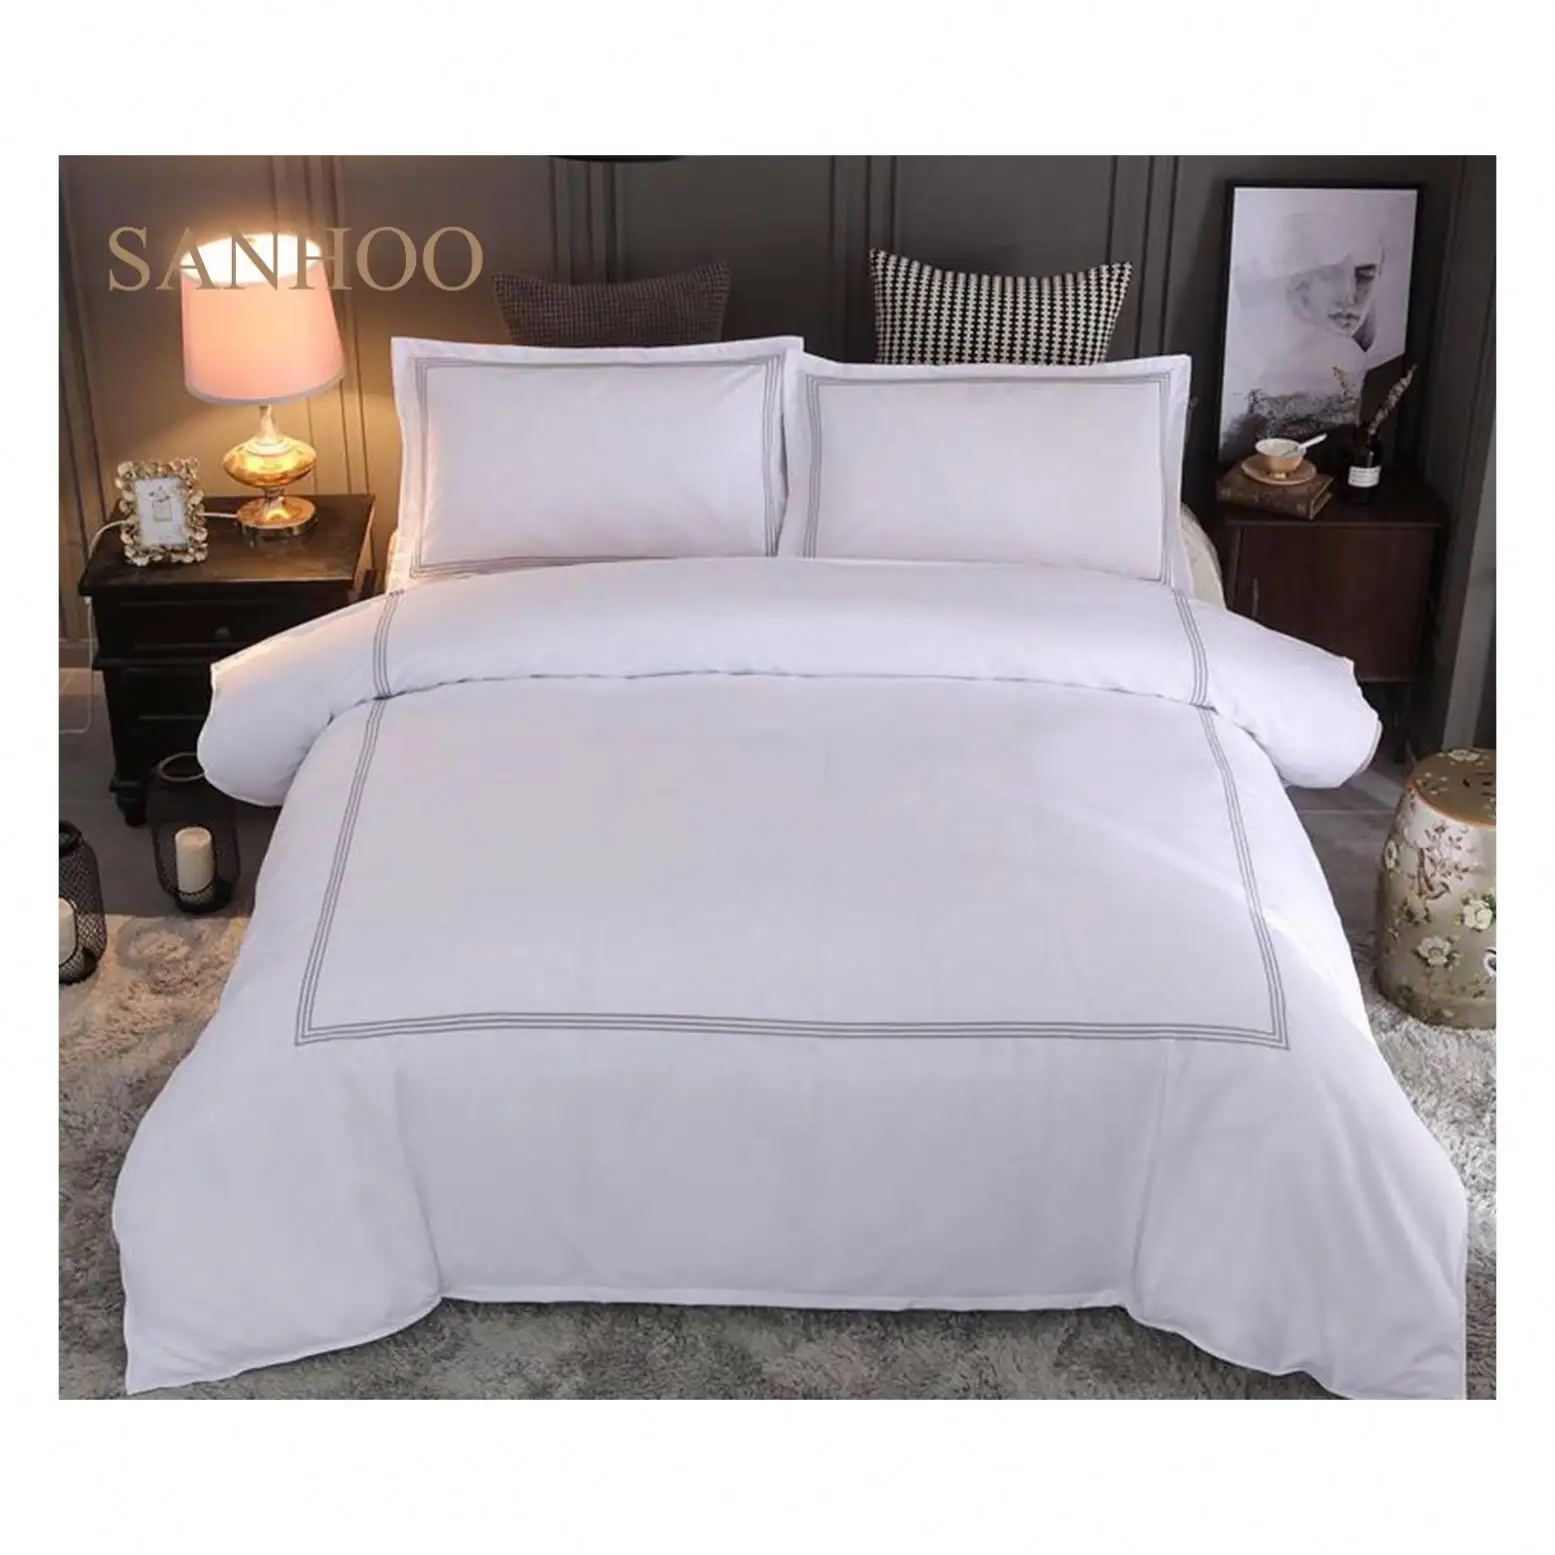 SANHOO Deluxe Sheraton Hotel 60S 6X6 Embroidery Cotton King Size Bedsheet 6Pcs High Cotton Quality Bedding Set Duvet Cover